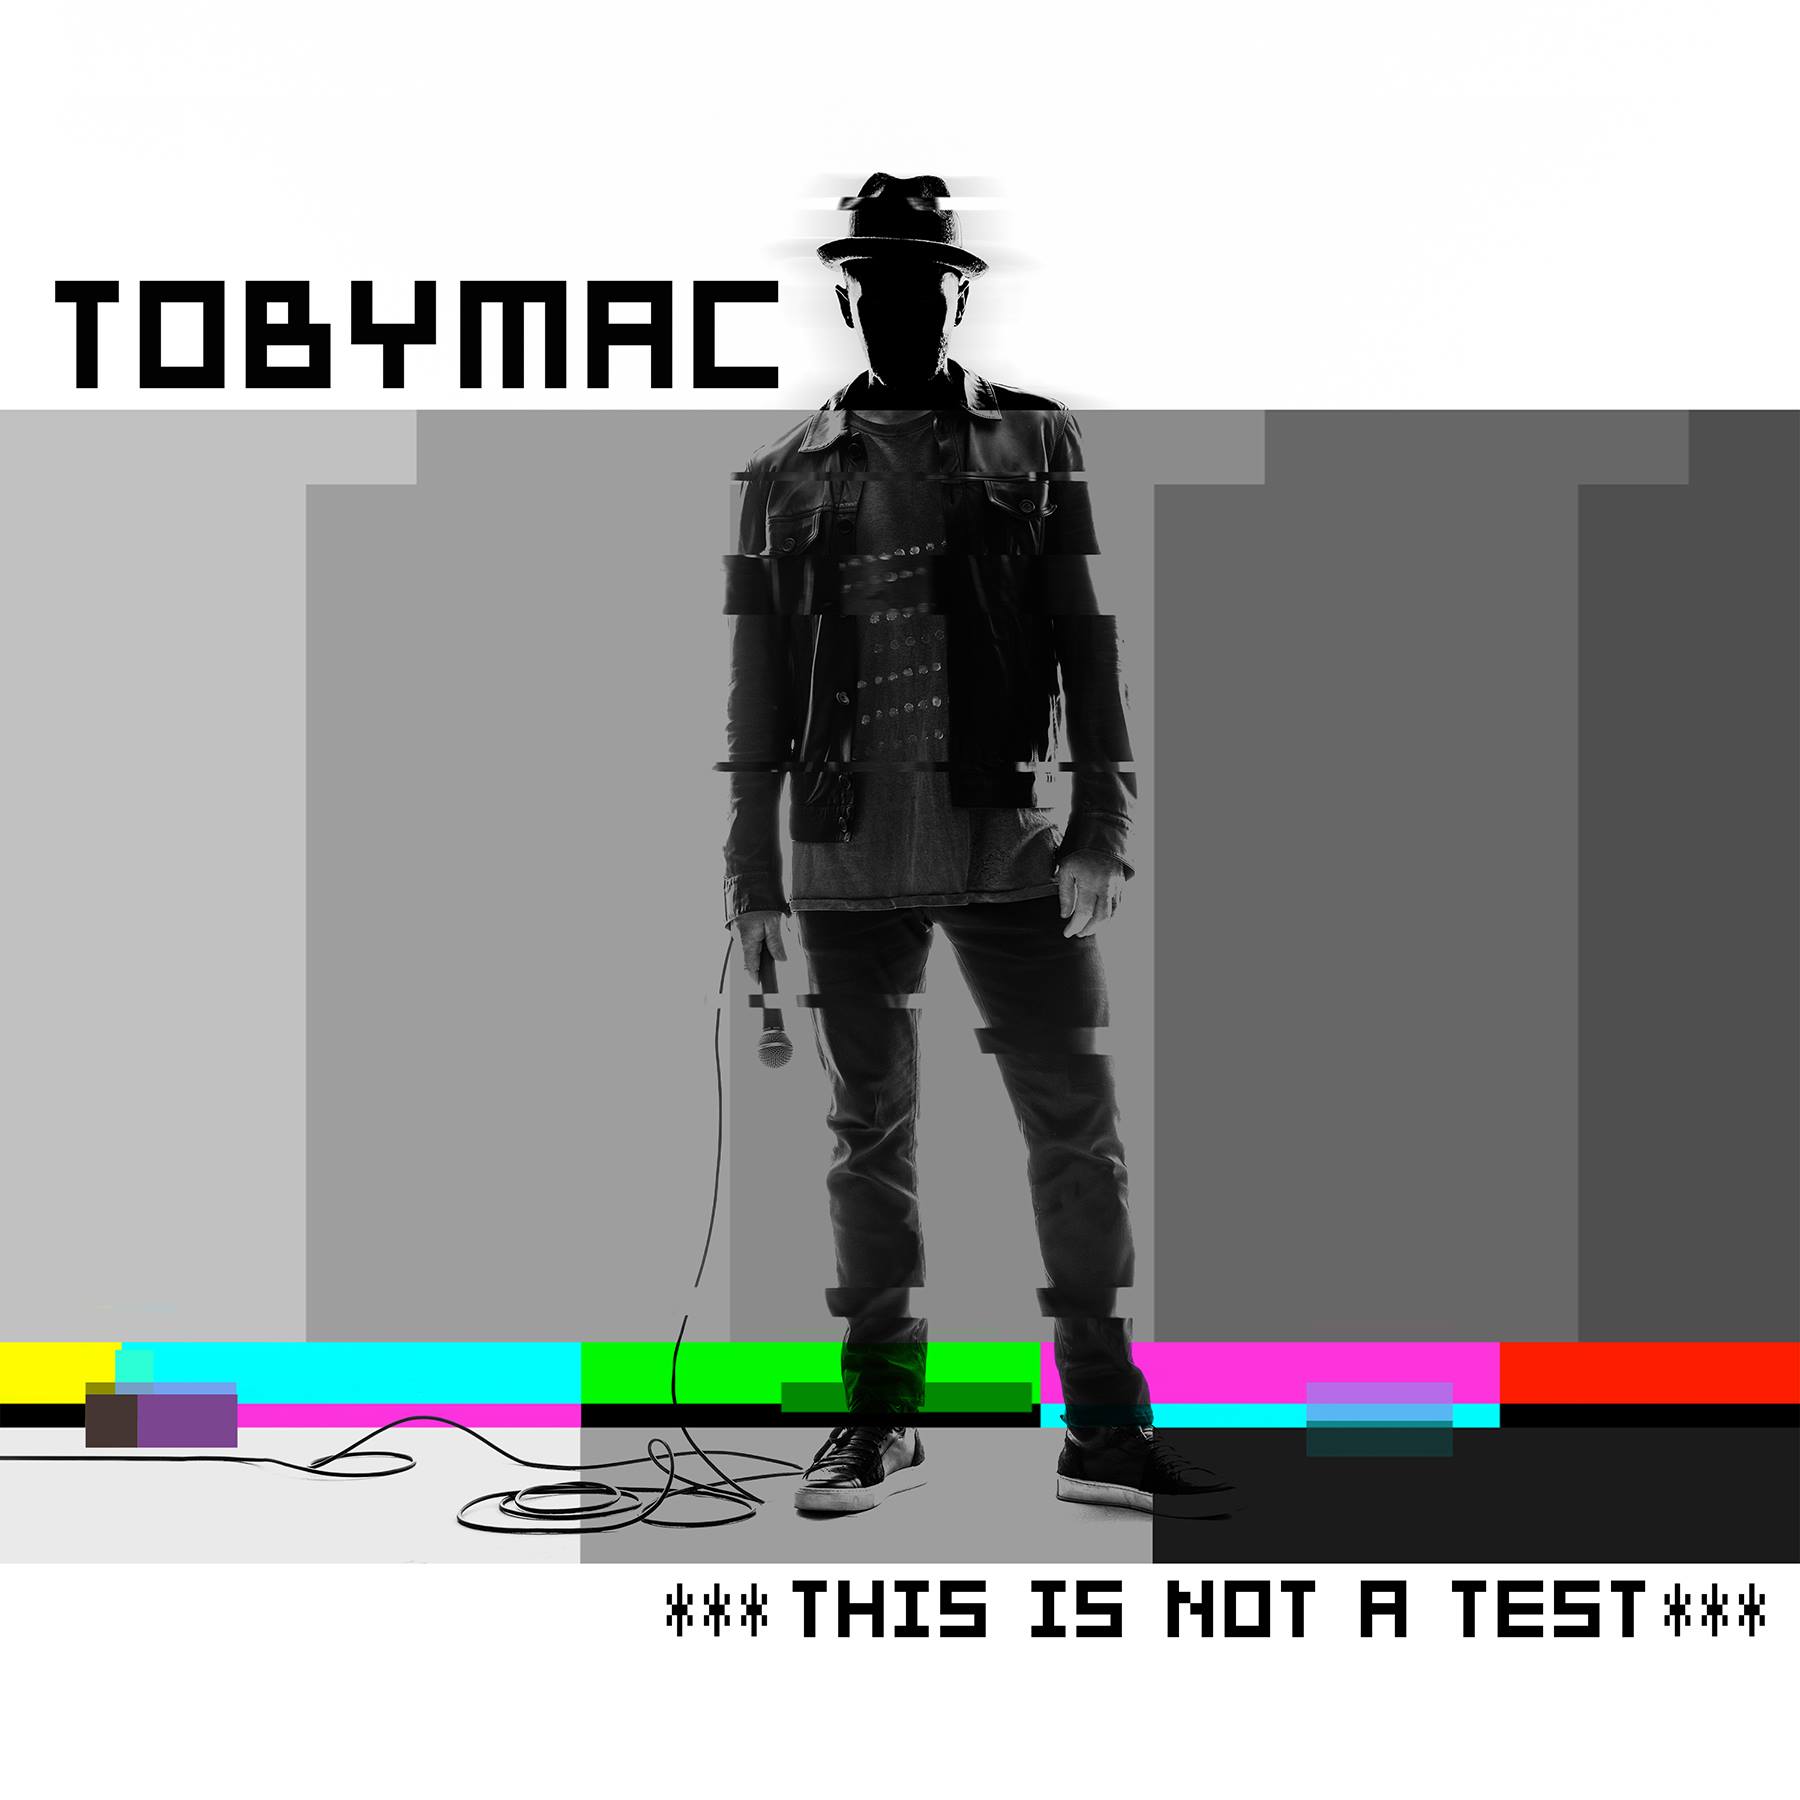 TobyMac - This Is Not a Test (Deluxe Edition) (2015) Album Info